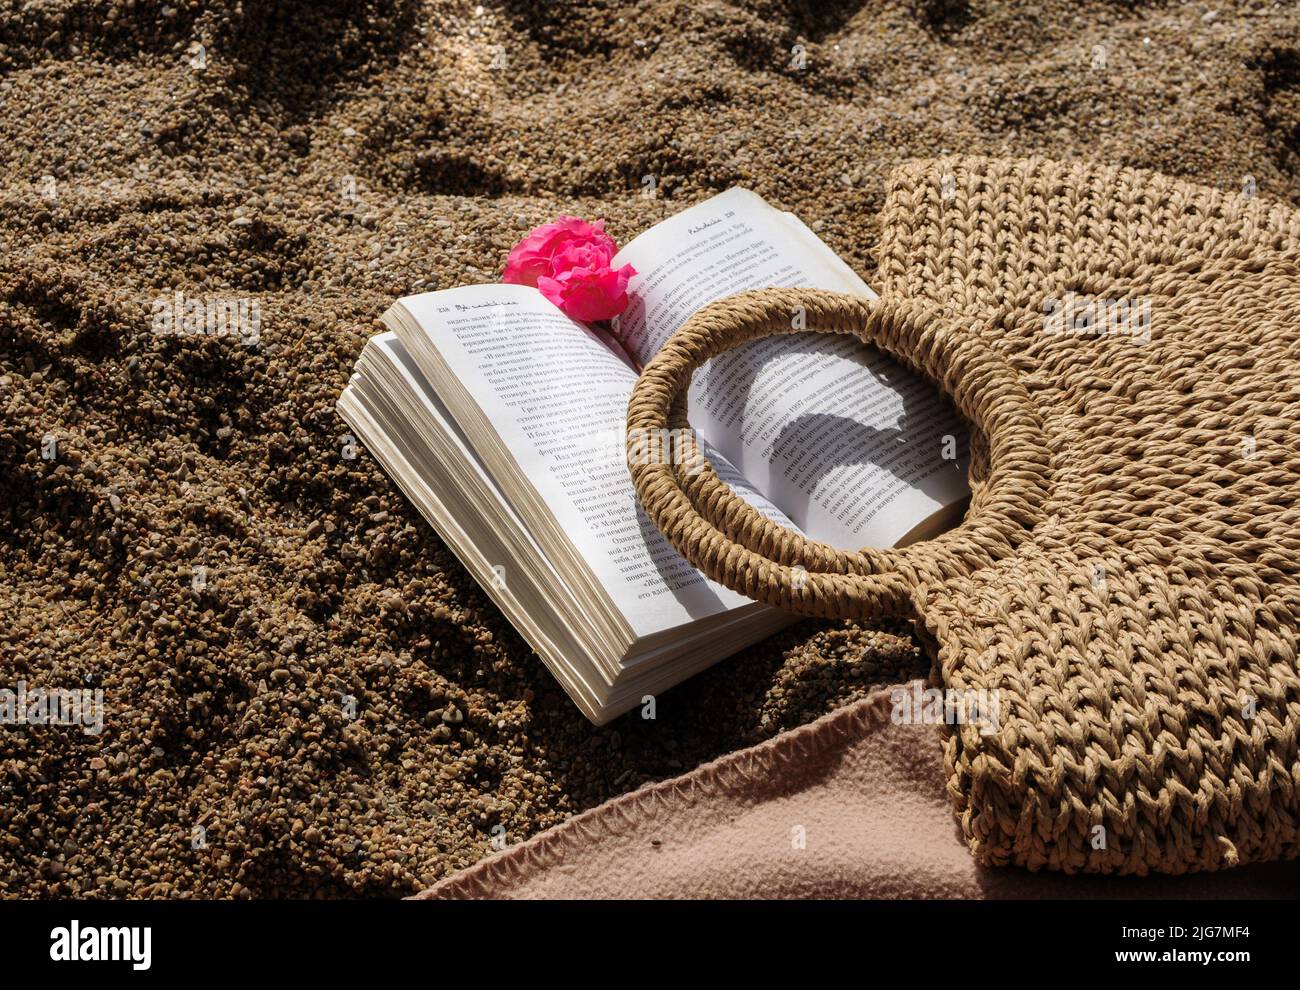 Top view of beach accessories: straw knitted bag and a book on a sandy beach Stock Photo